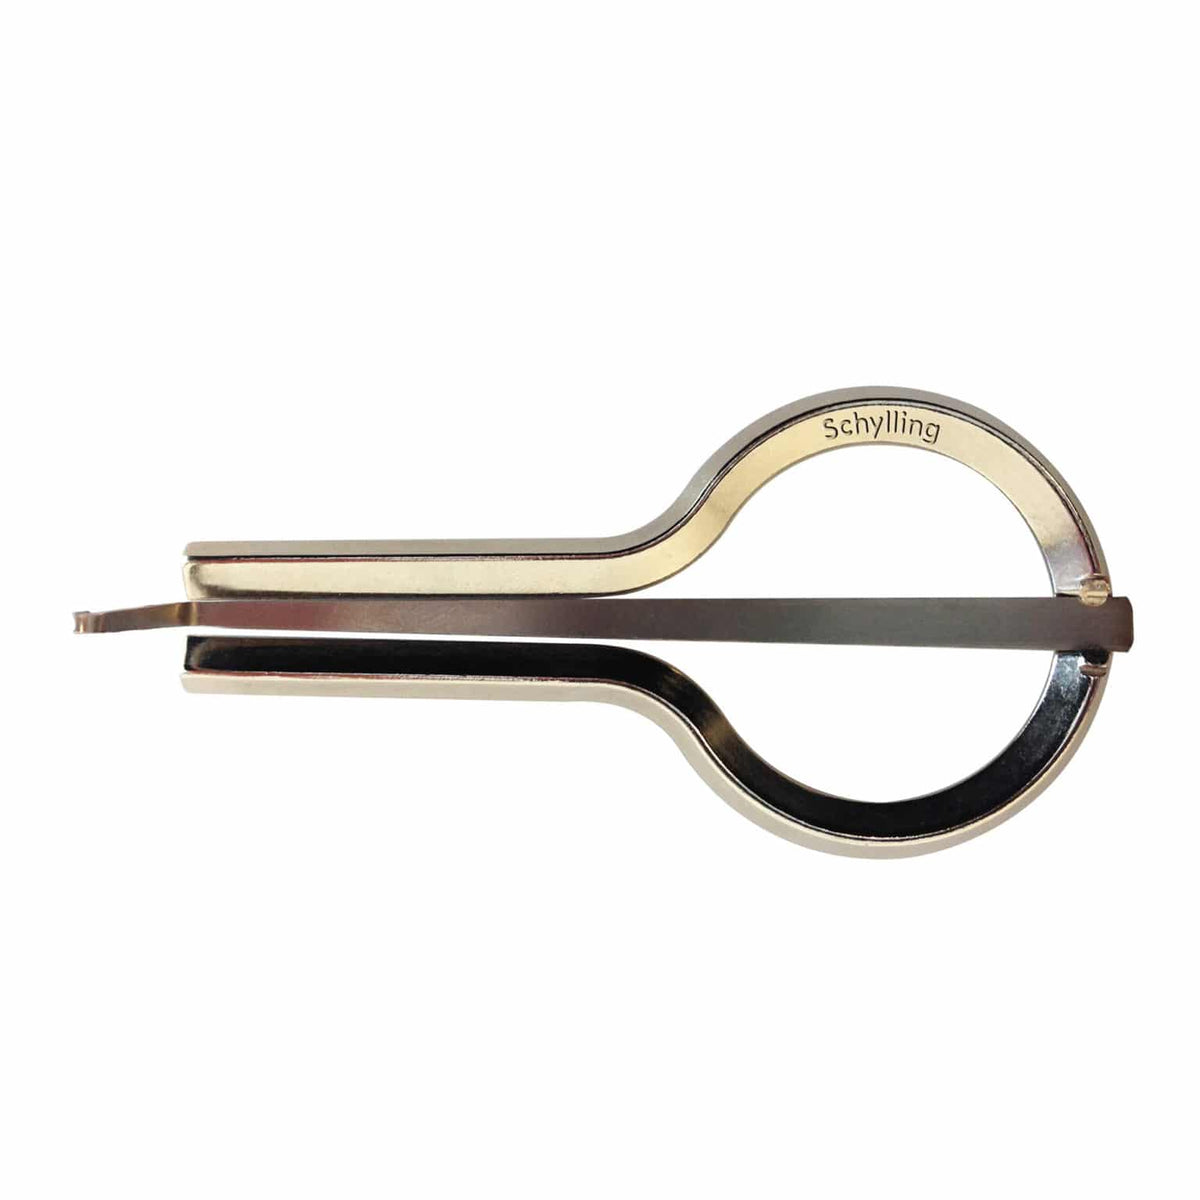 Front view of Jaw Harp out of package,